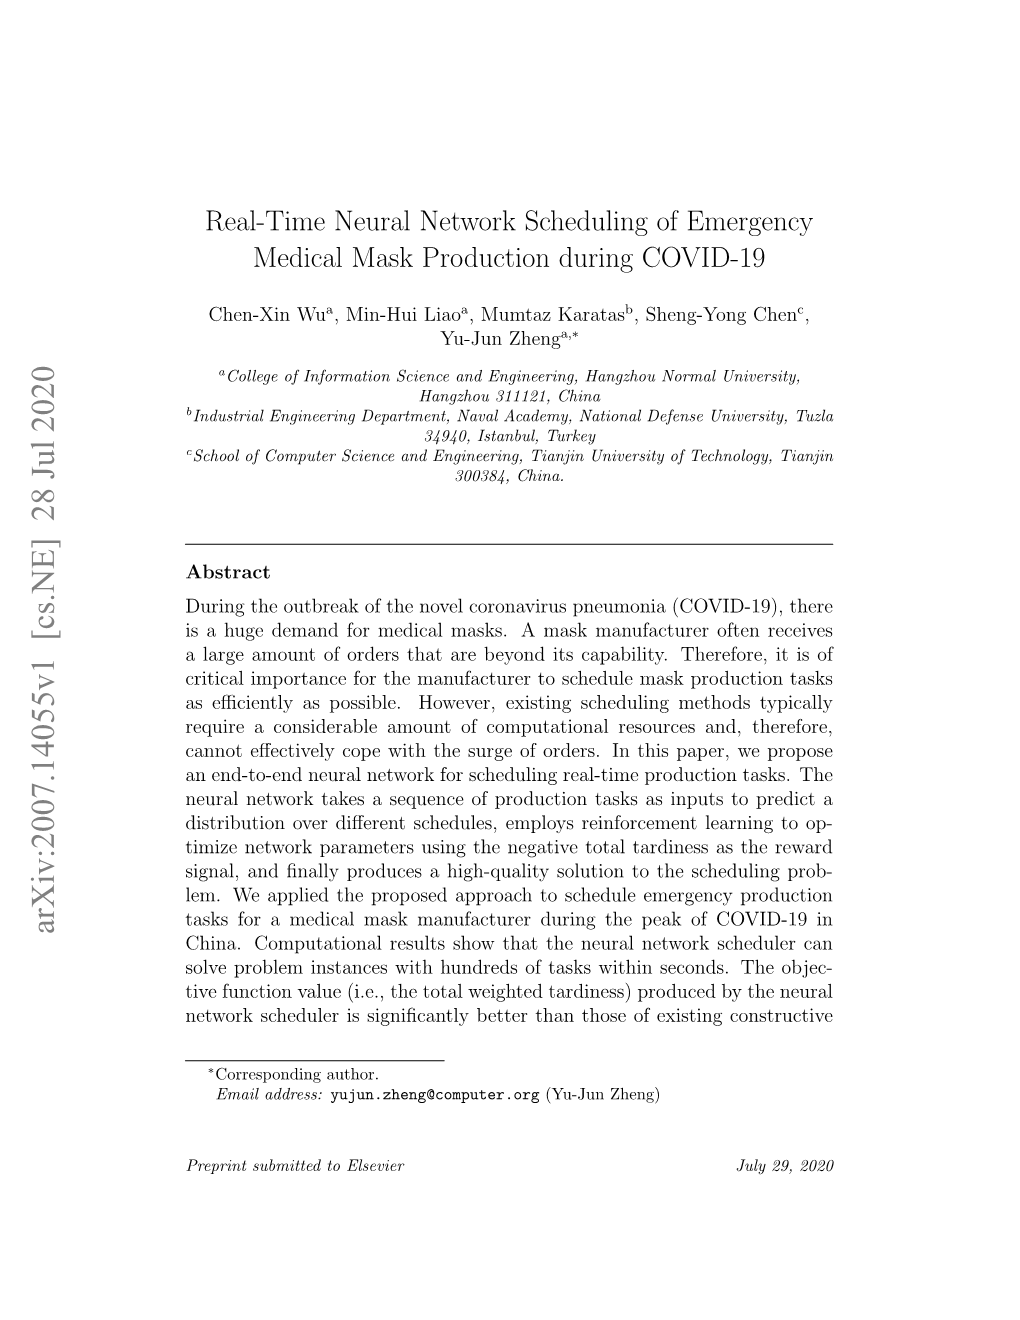 Real-Time Neural Network Scheduling of Emergency Medical Mask Production During COVID-19